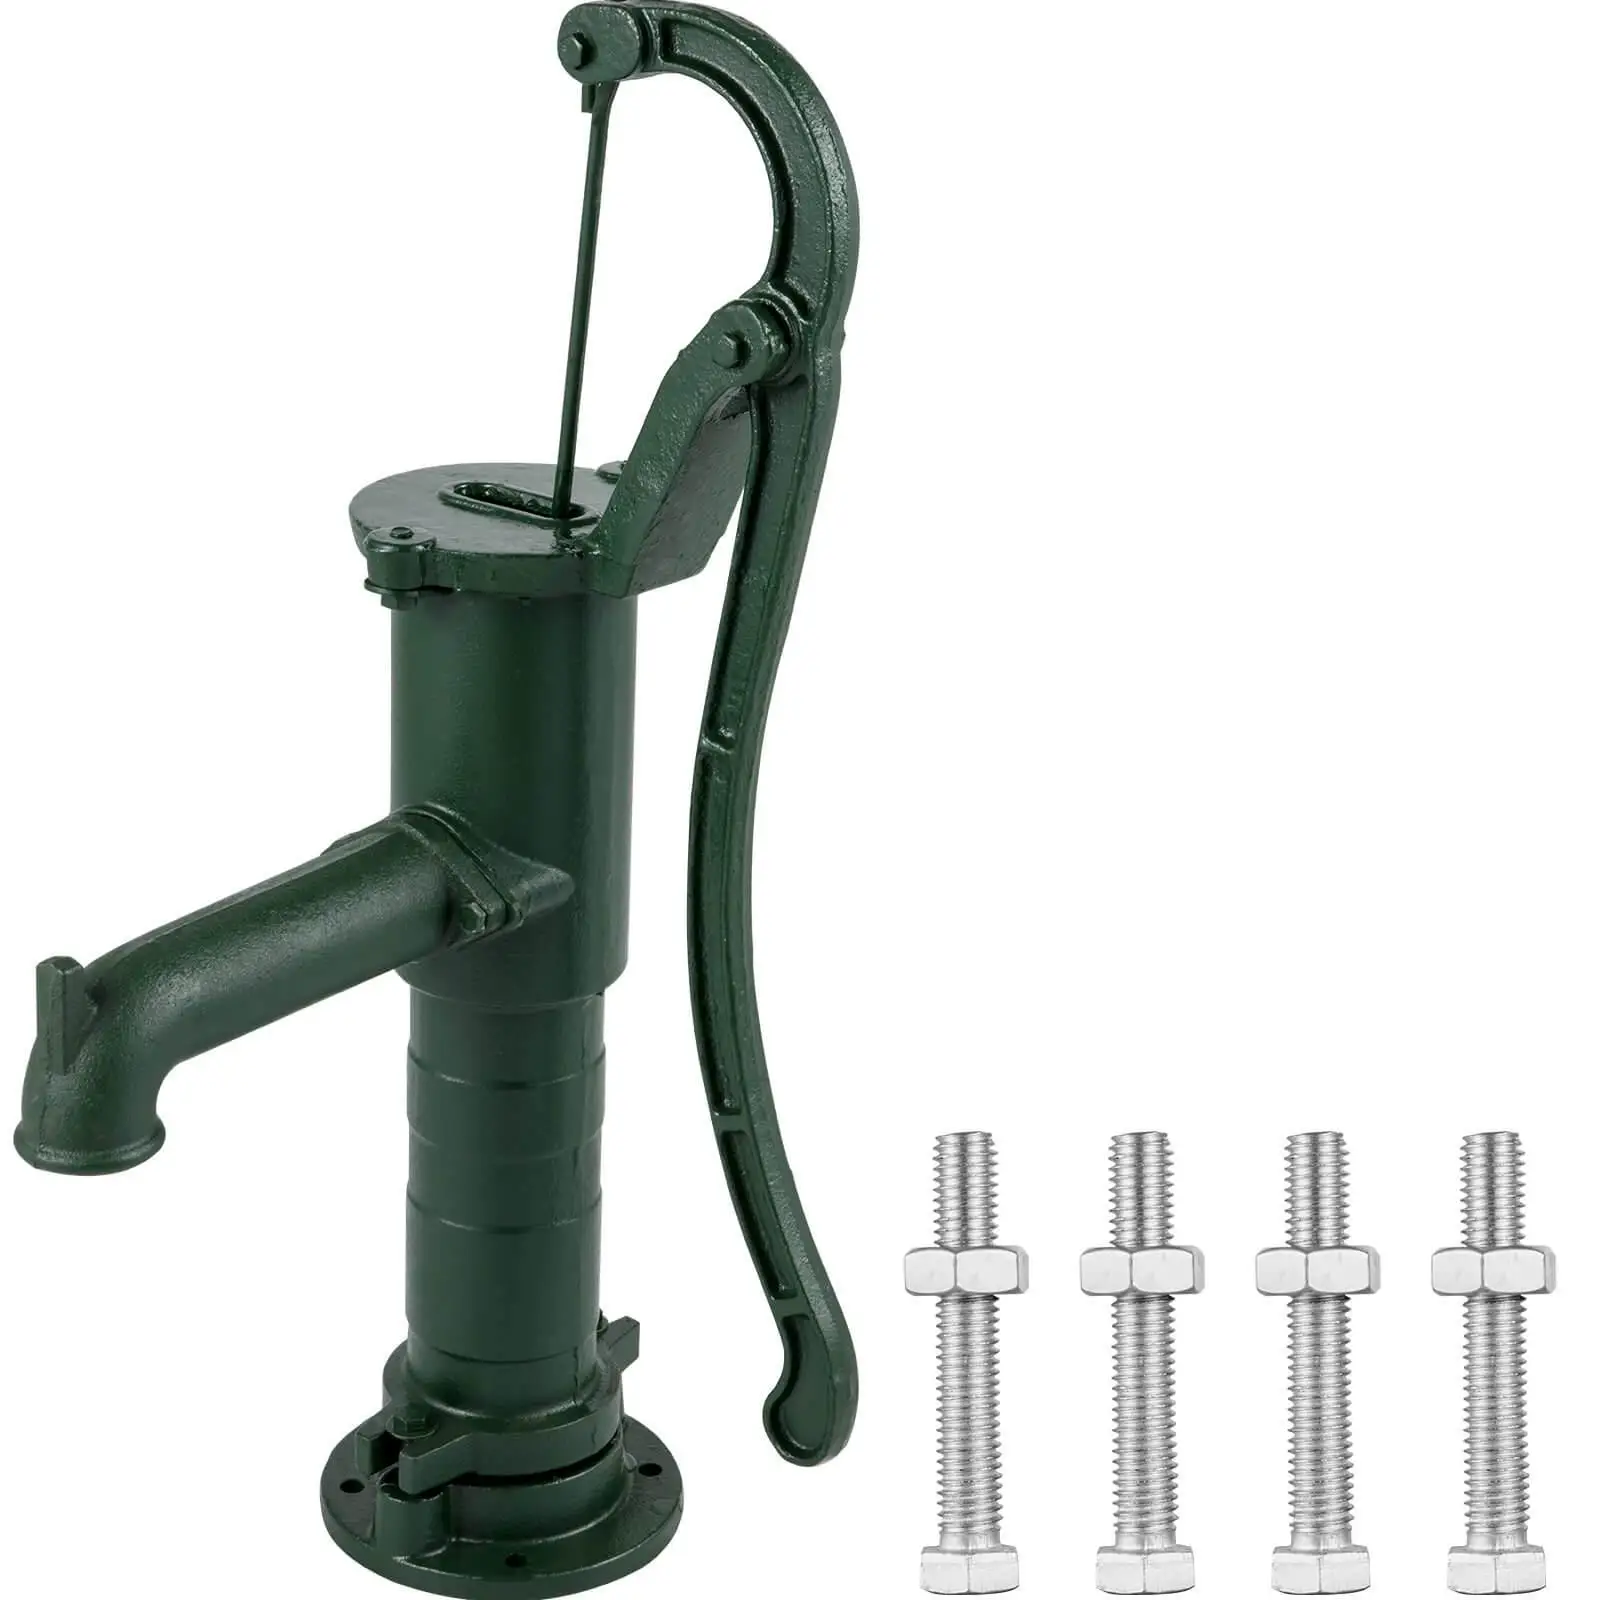 Learn DIY Installation of Hand Pumps by Using These Simple Tips